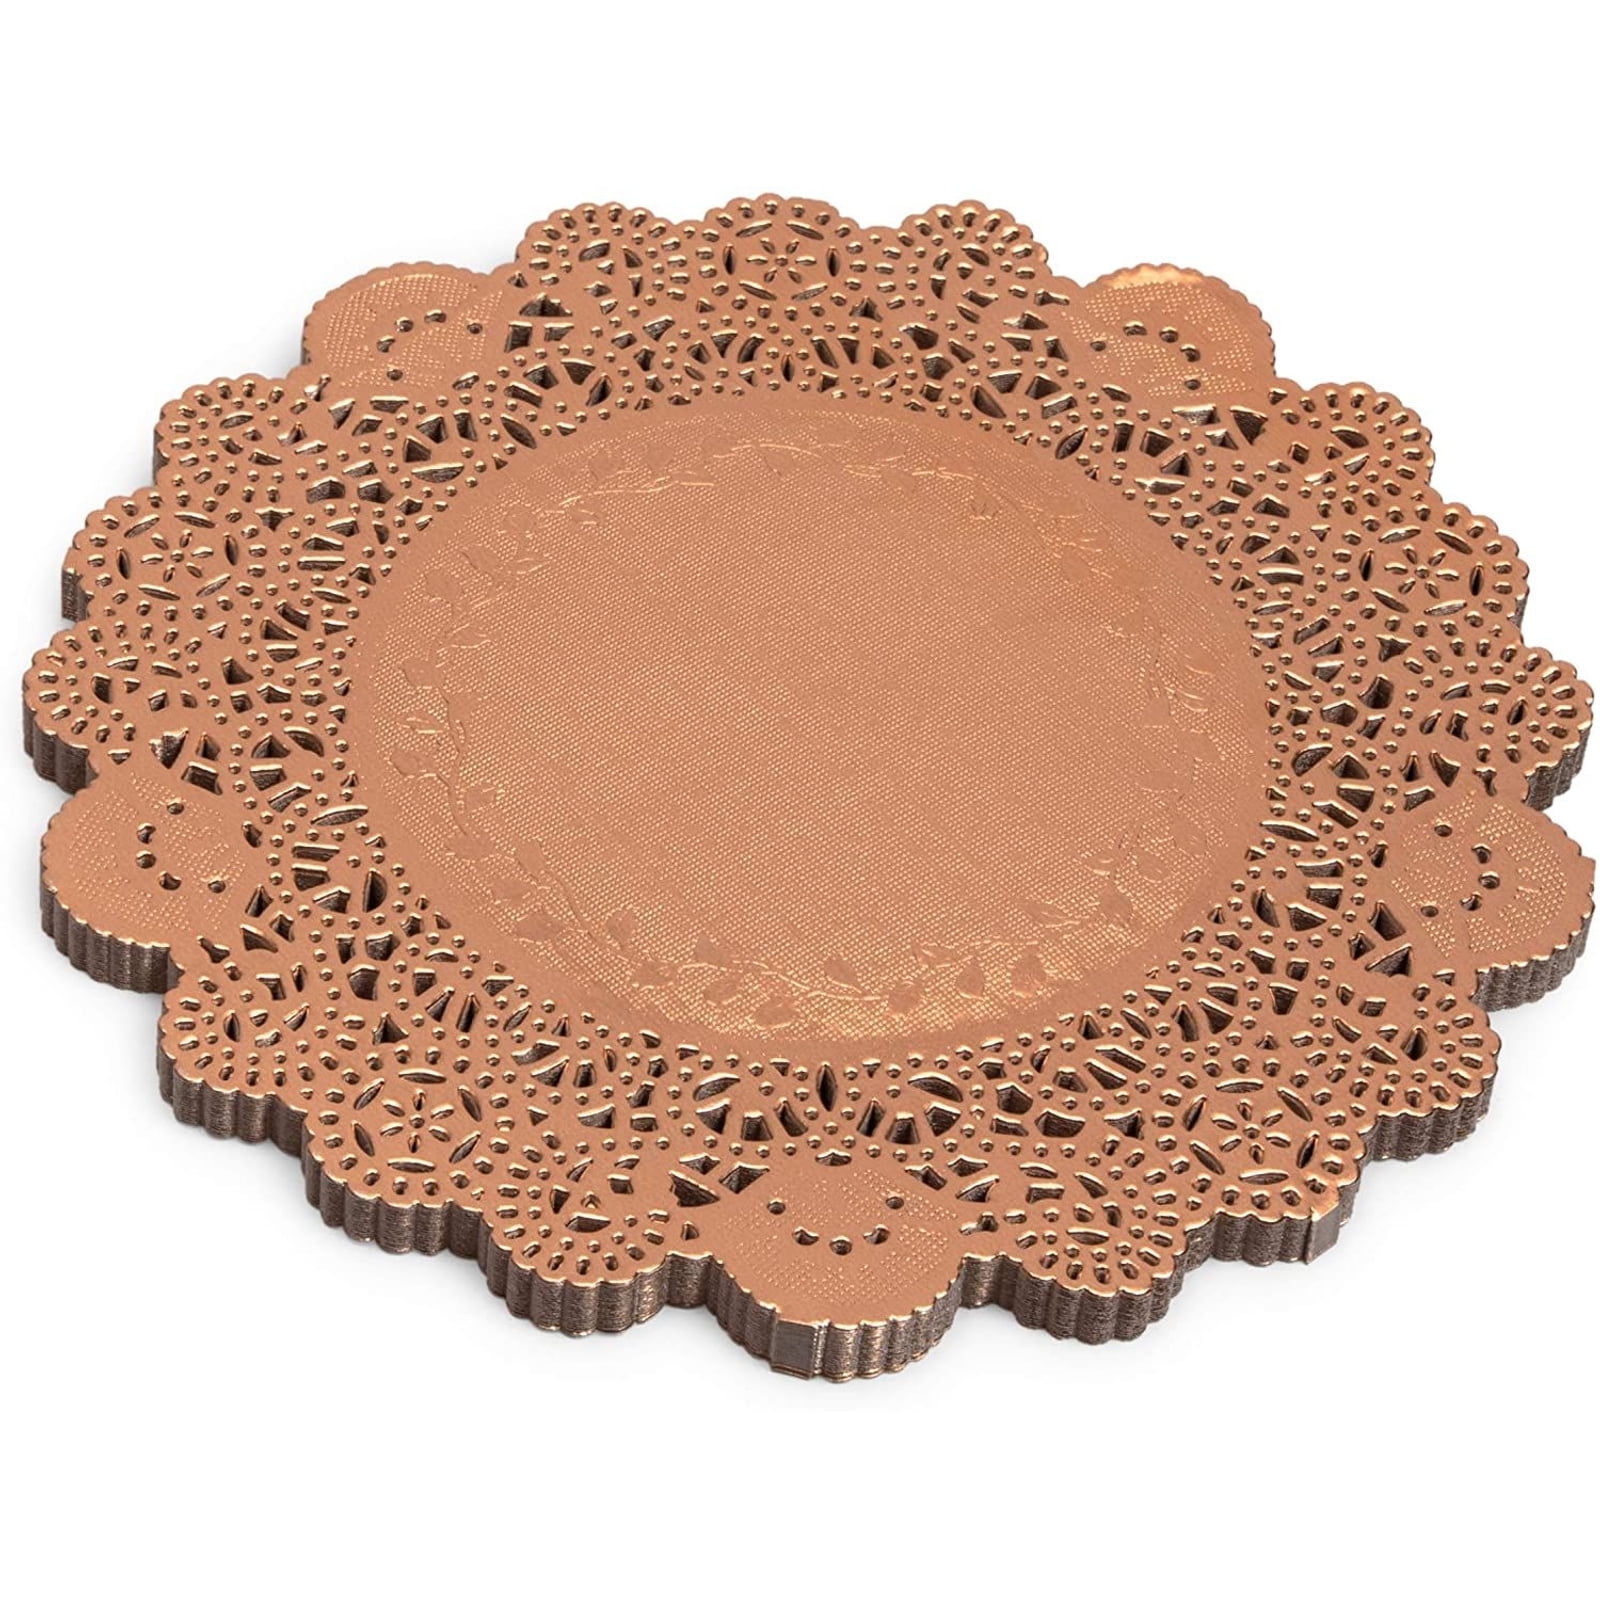 FREE SHIPPING US ONLY 500 USA SELLER  10" LACE DOILIES 